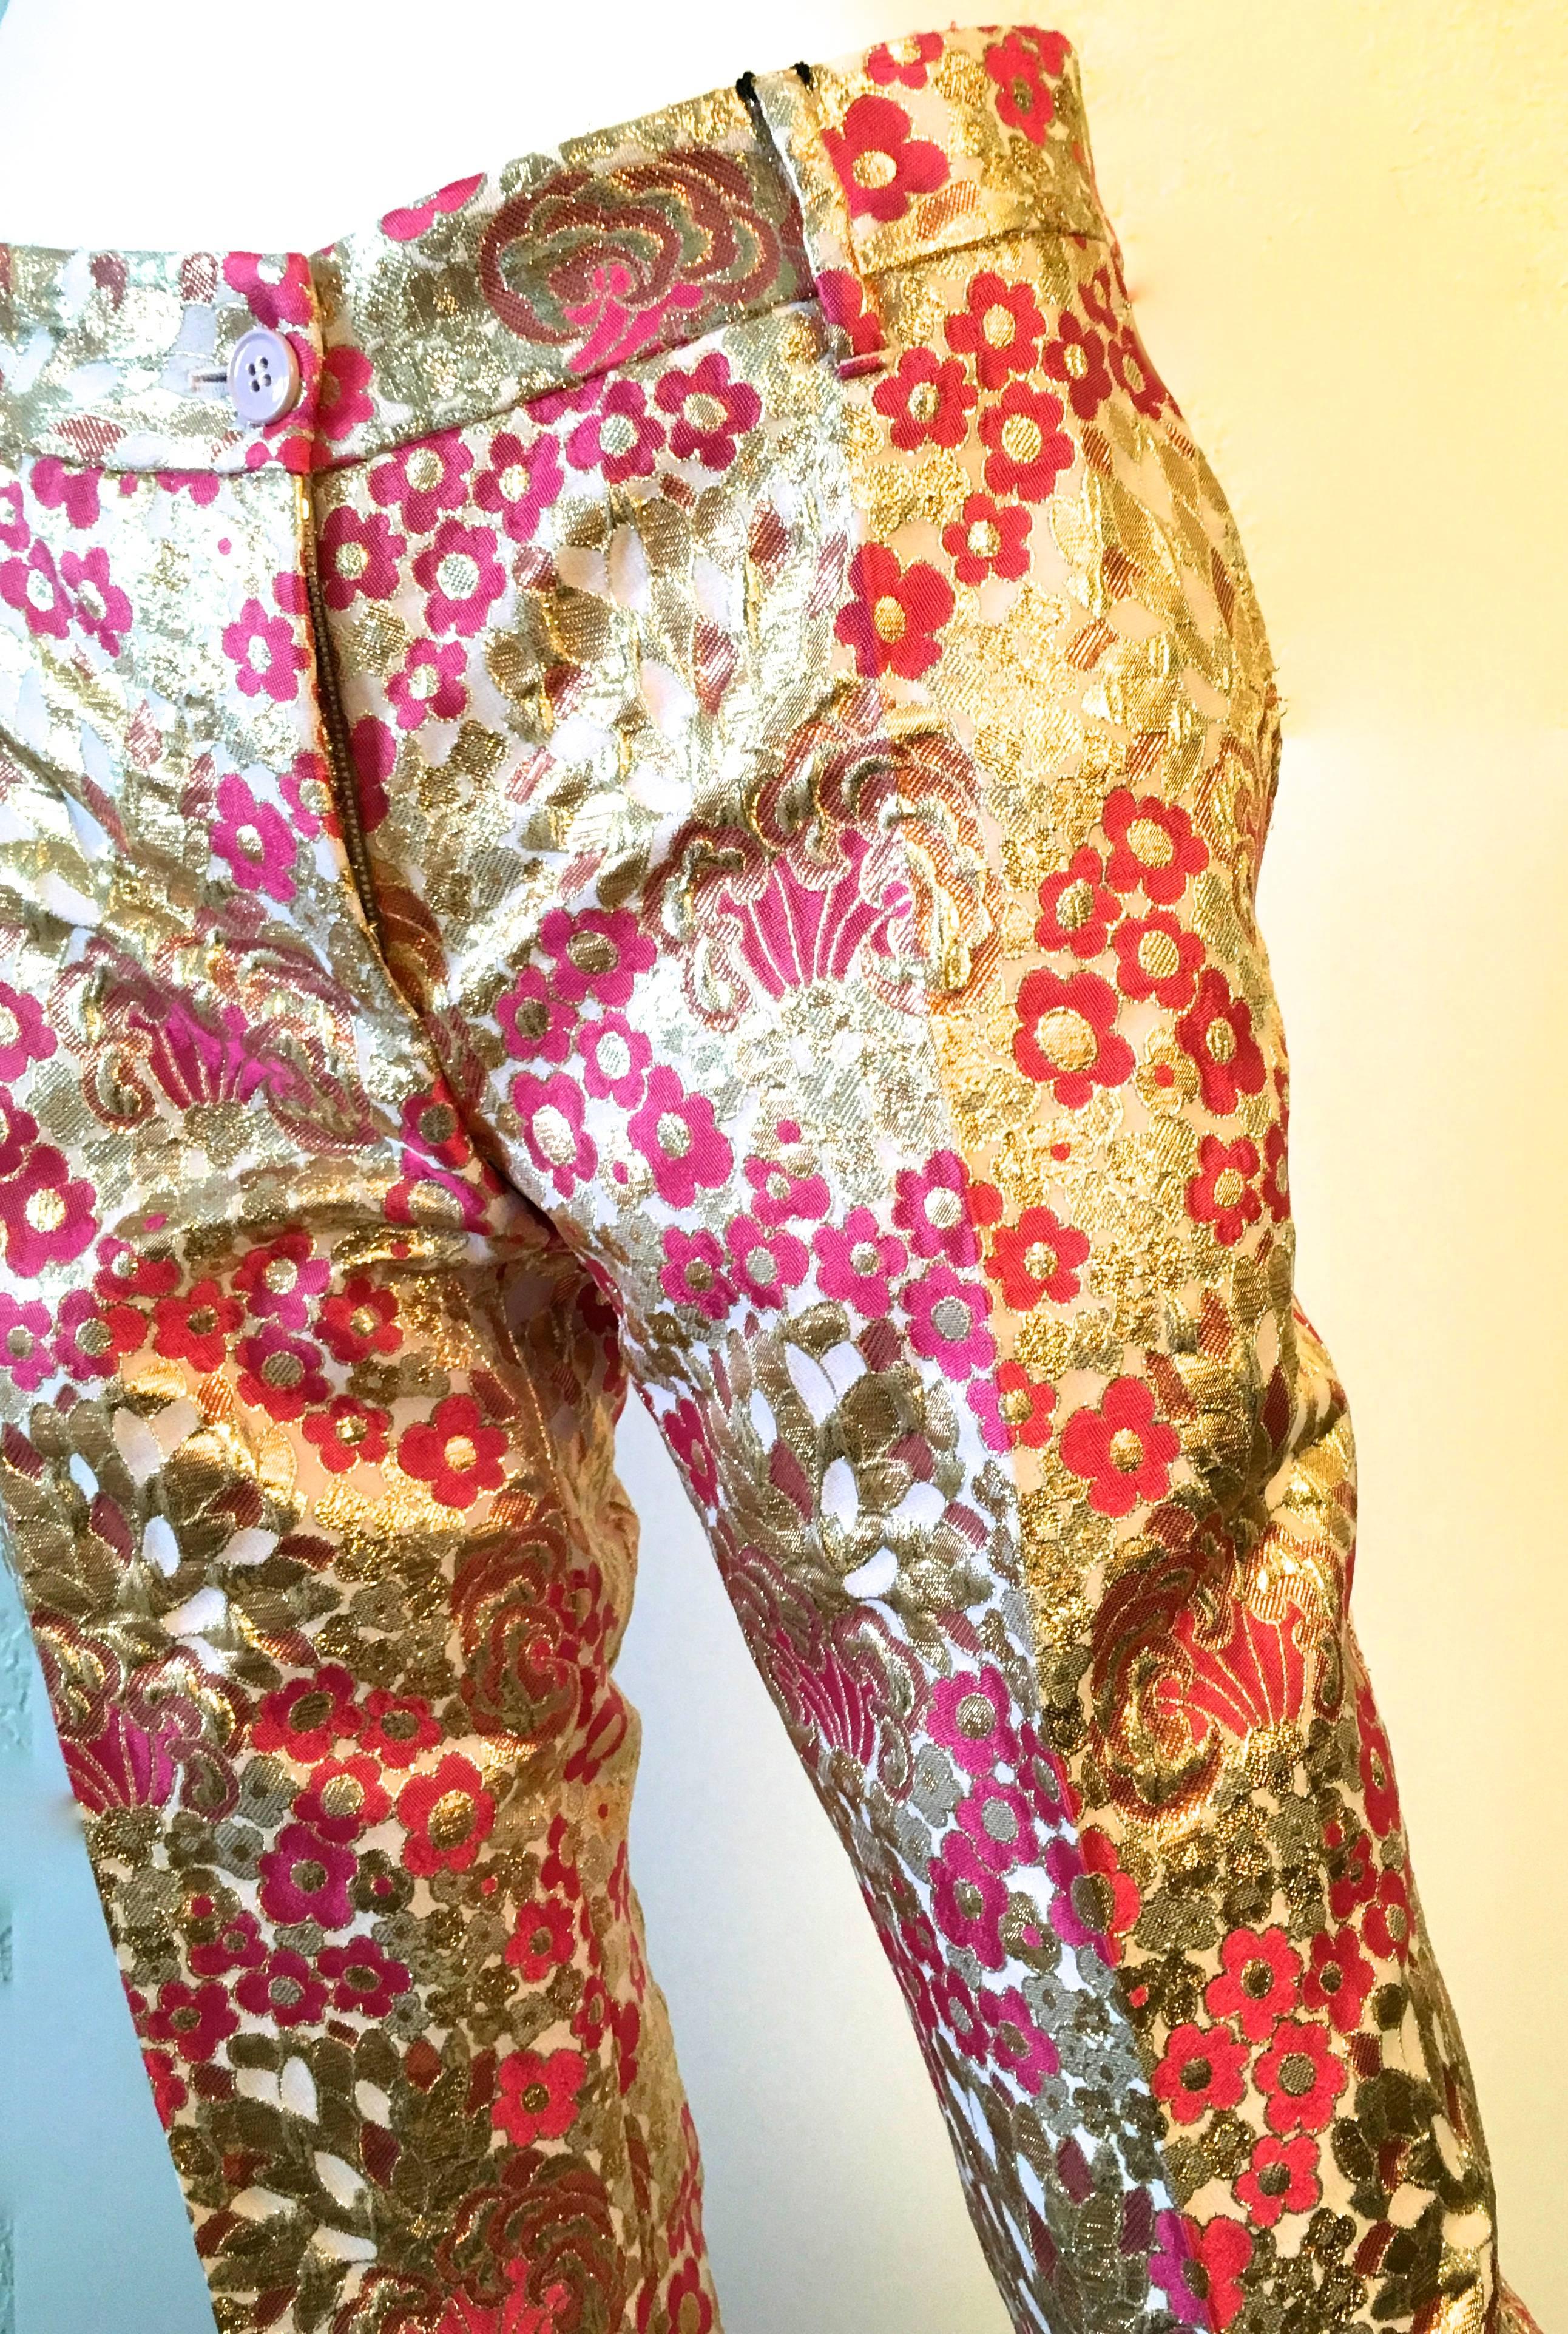 Presented here is a magnificent pair of Dolce and Gabbana pants. The pants are a size 36. The silk brocade fabric is absolutely magnificent and the fabric is woven threads of gold and light pink and magenta flowers throughout. These pants are in